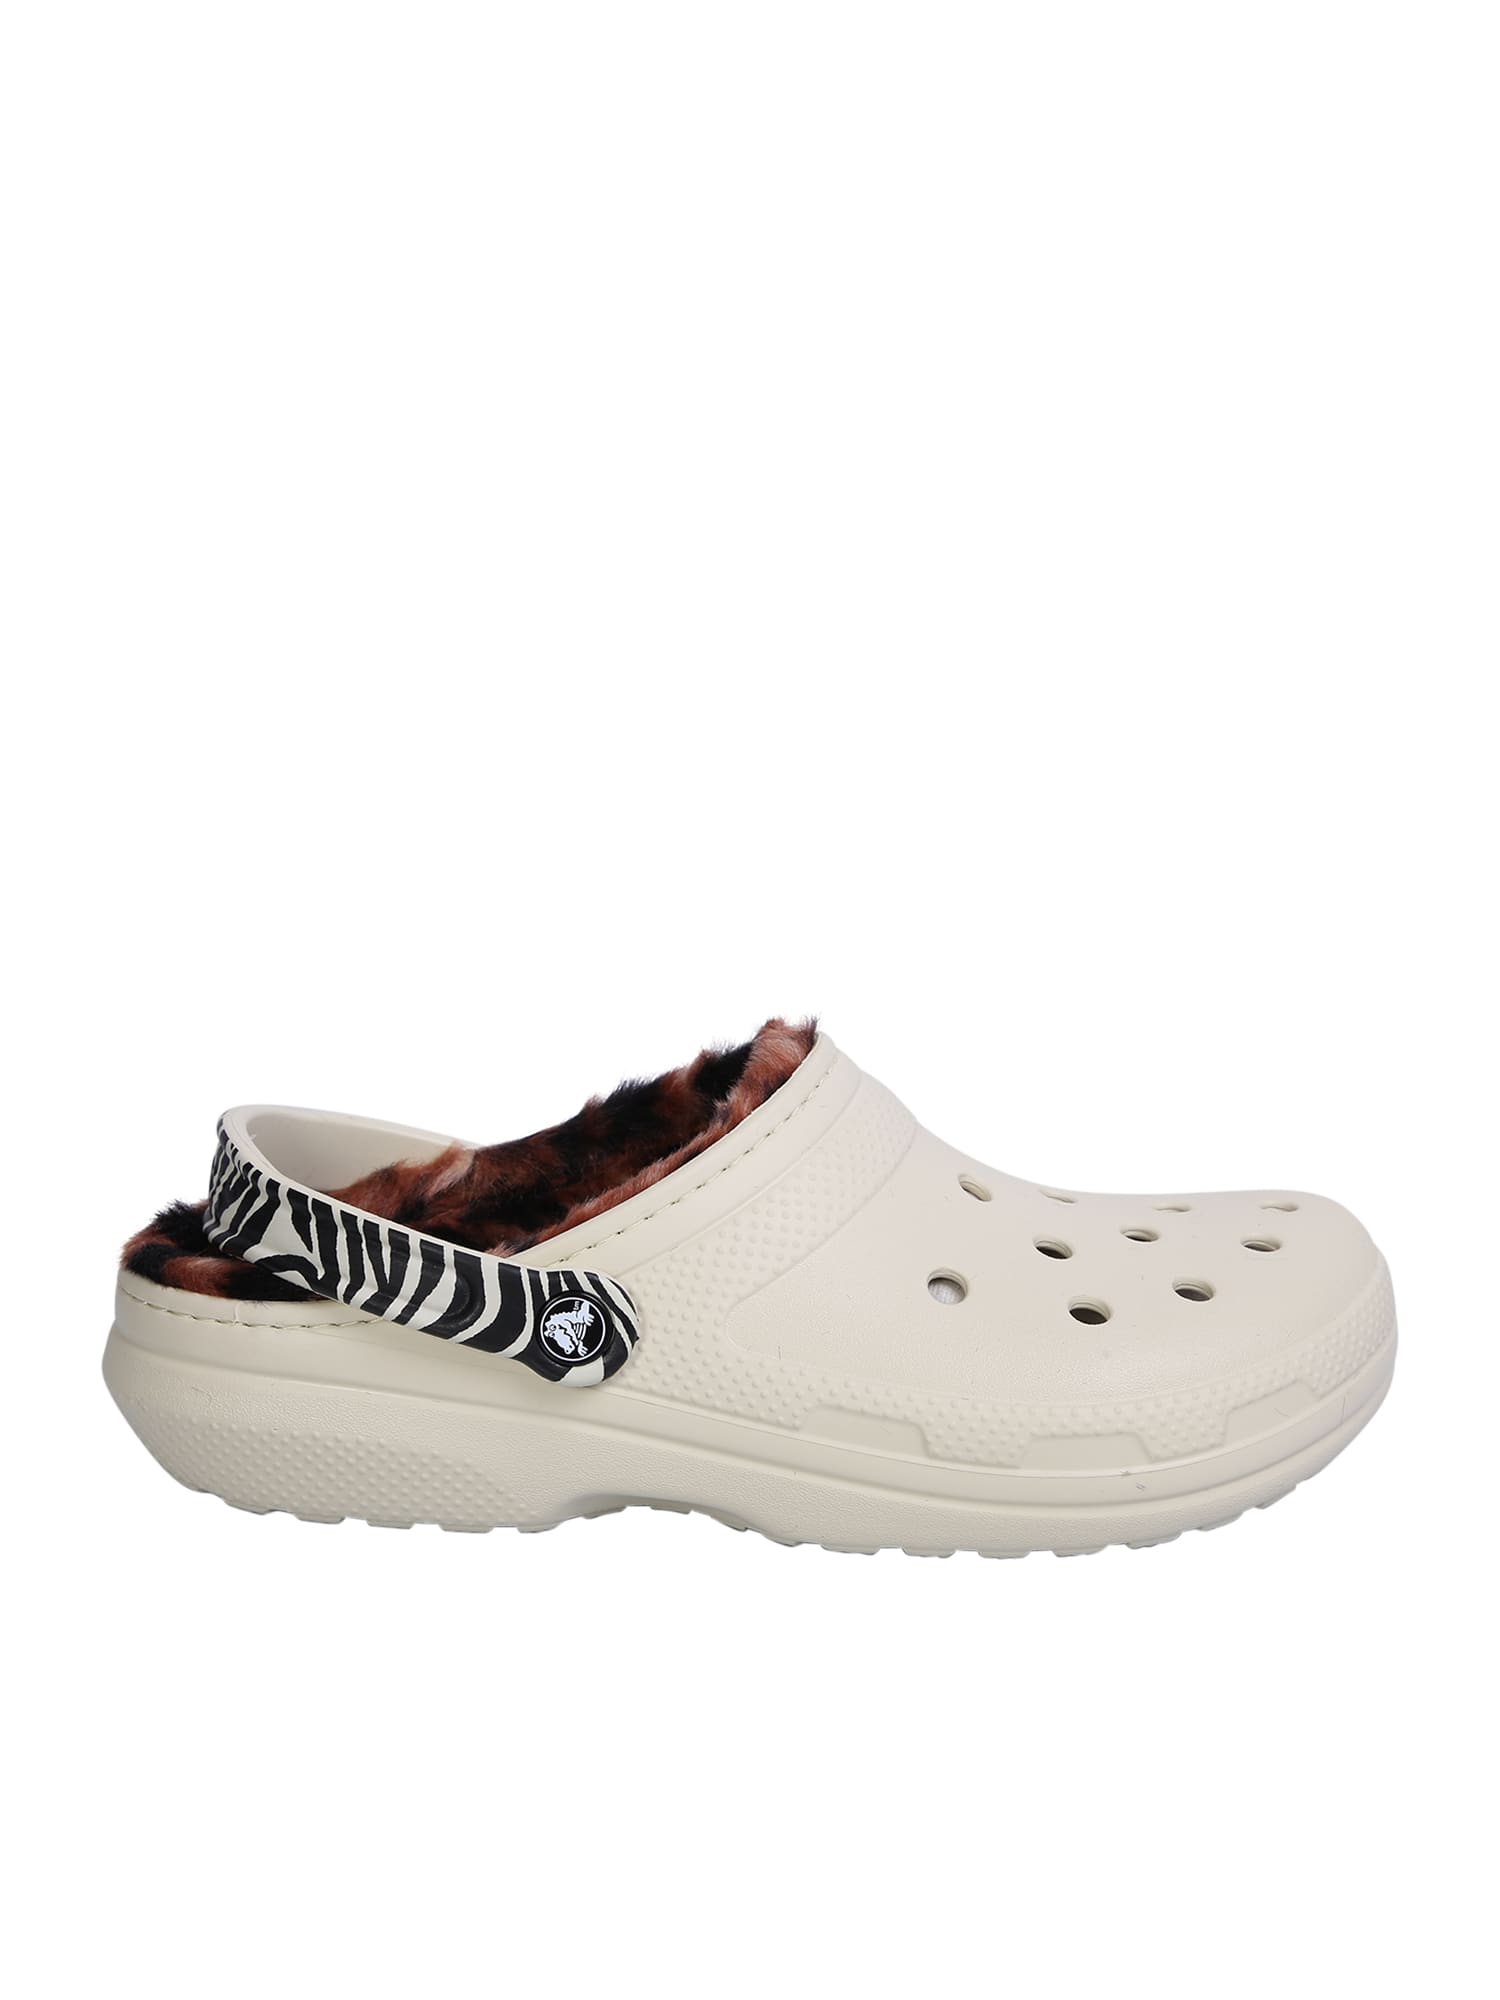 Crocs Lined Animal Clog Sandals In White